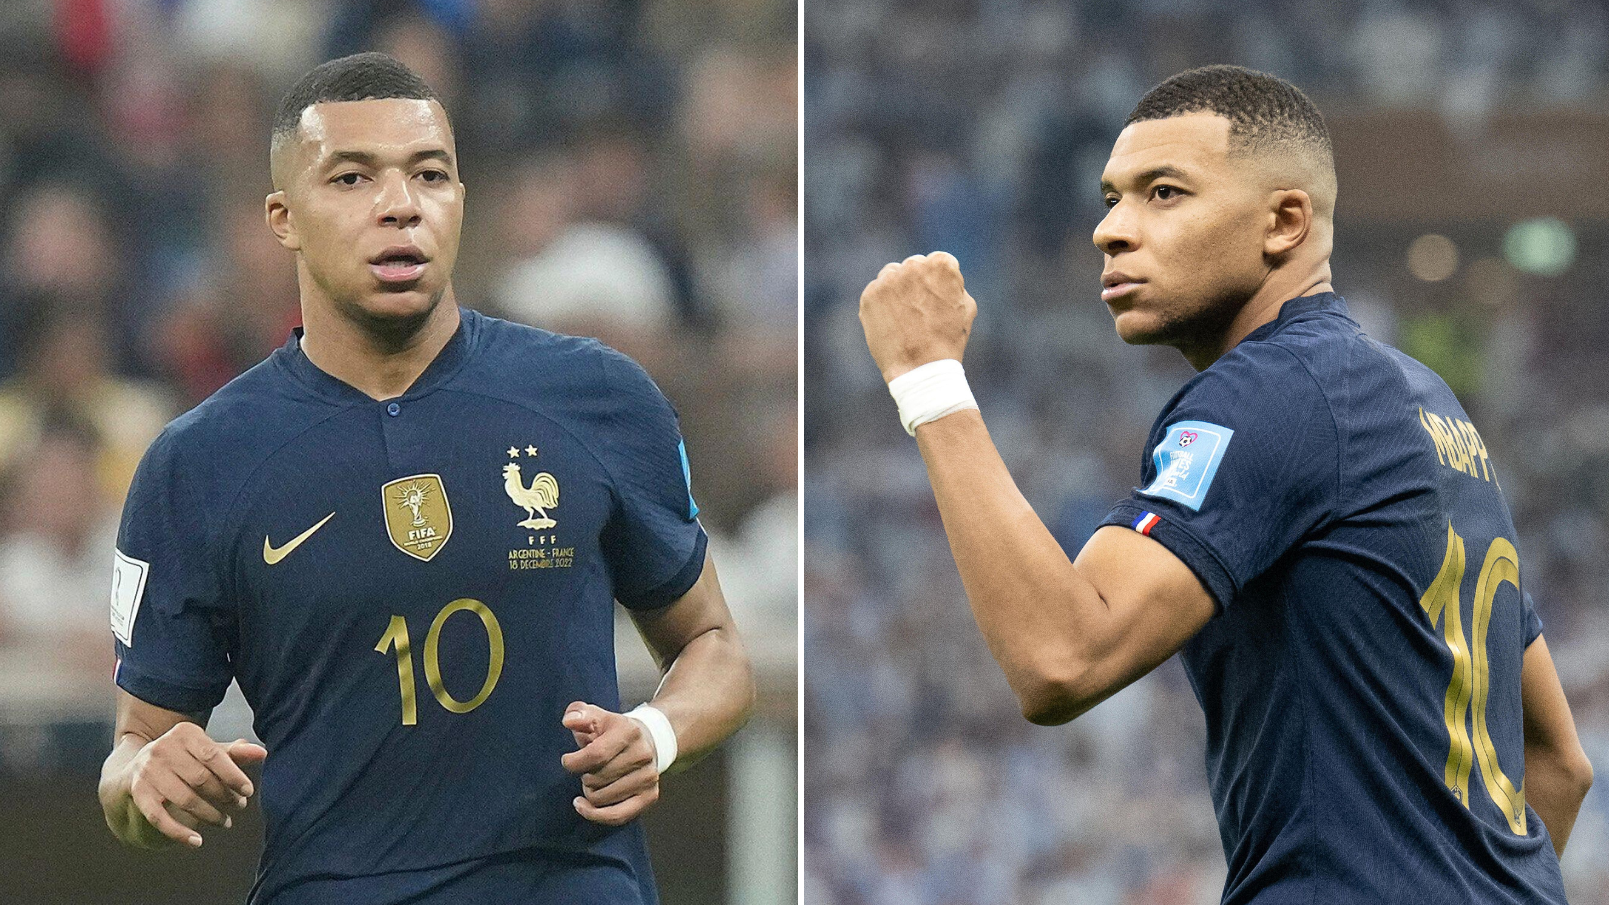 Kylian Mbappe named as new France captain following World Cup